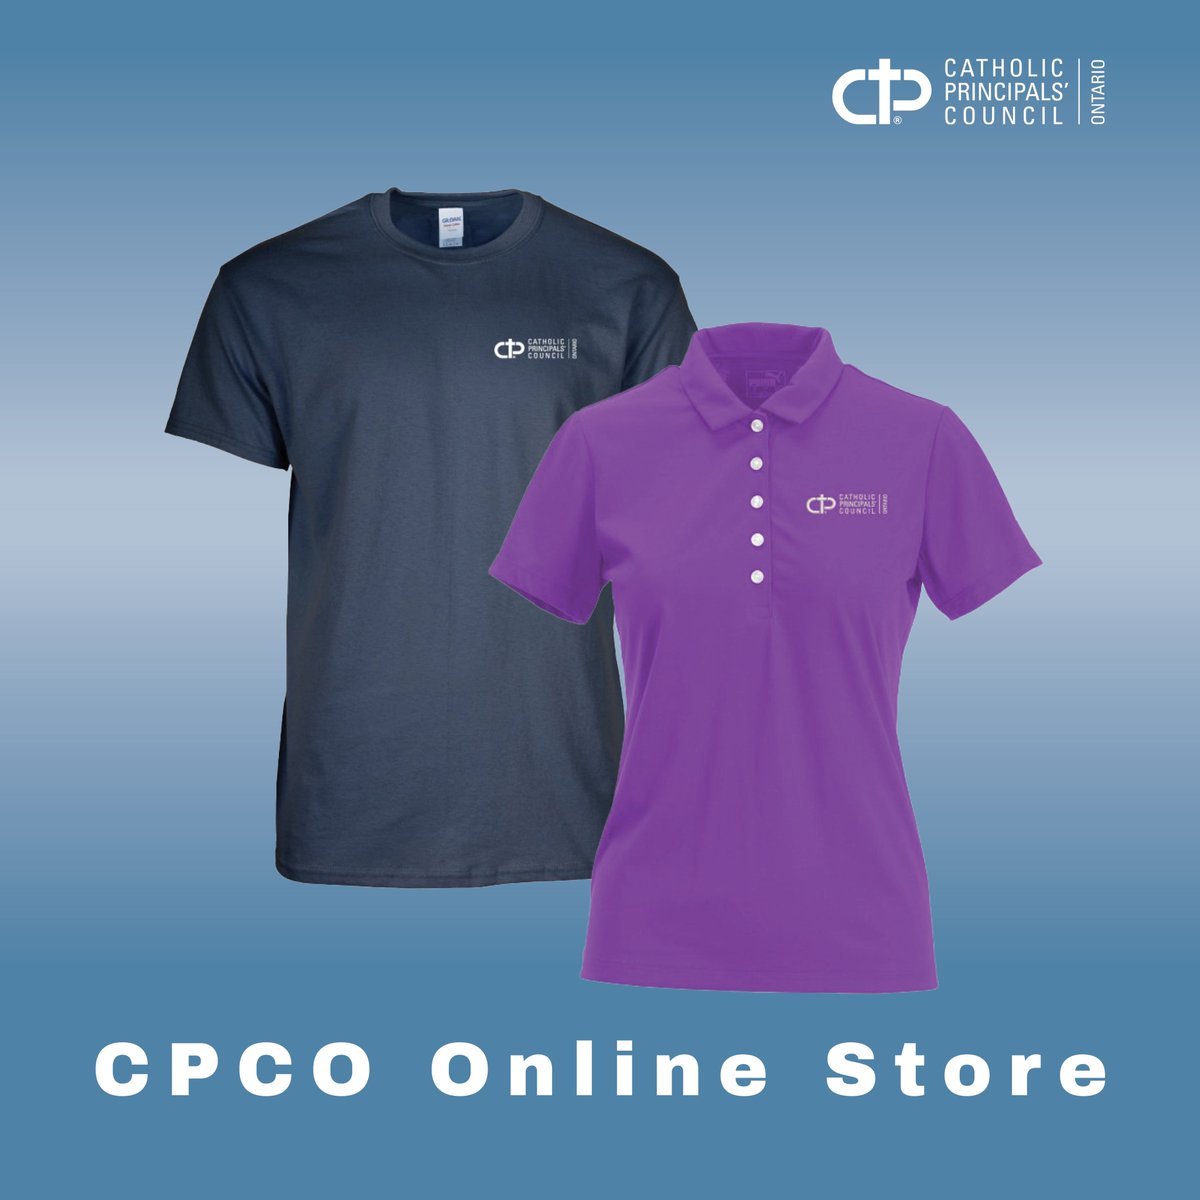 CPCO Online Store is back! The relaunched store now offers an array of products from leading brands, along with personalized selections and a diverse range of items to cater to every need. Shop now bit.ly/3HdLikw and save by using CPCO promo code!